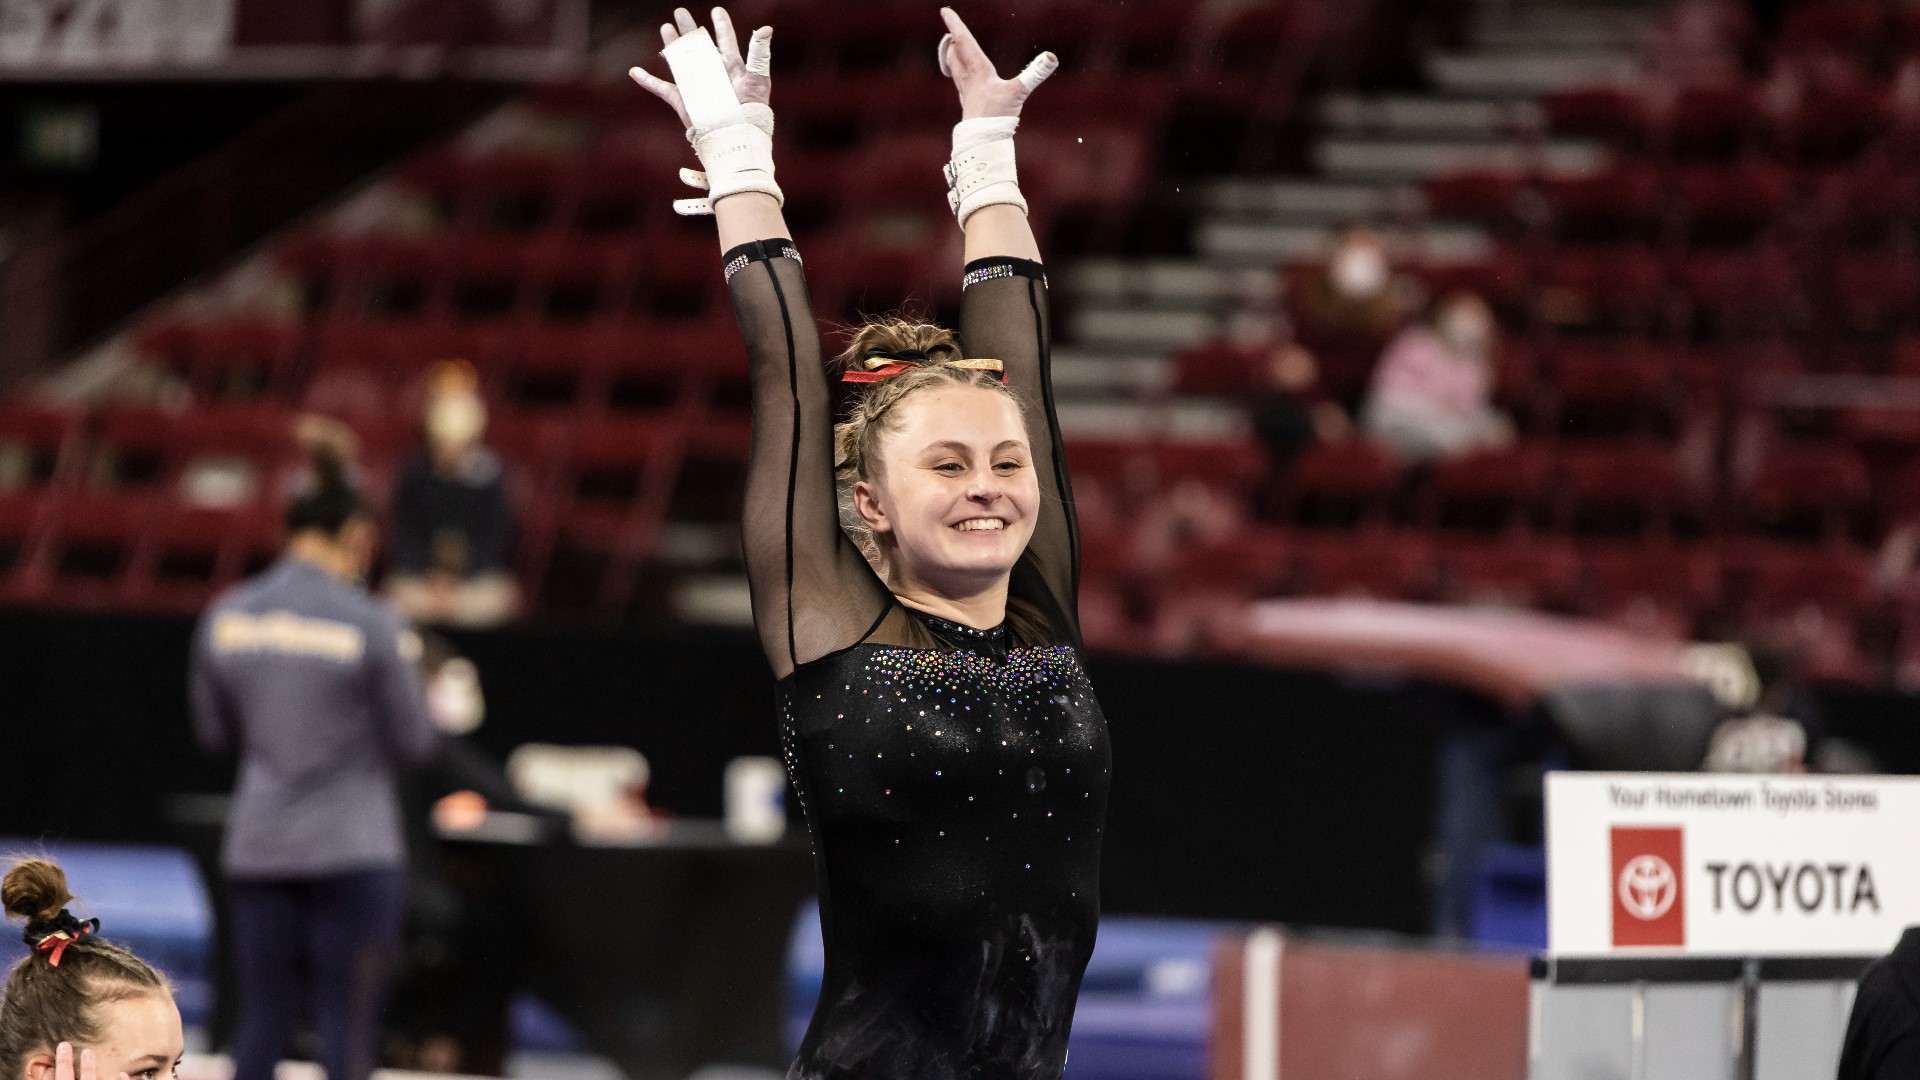 Sophomore Rylie Mundell has already obtained a physics research grant and near-perfect gymnastics scores in only one year of college.